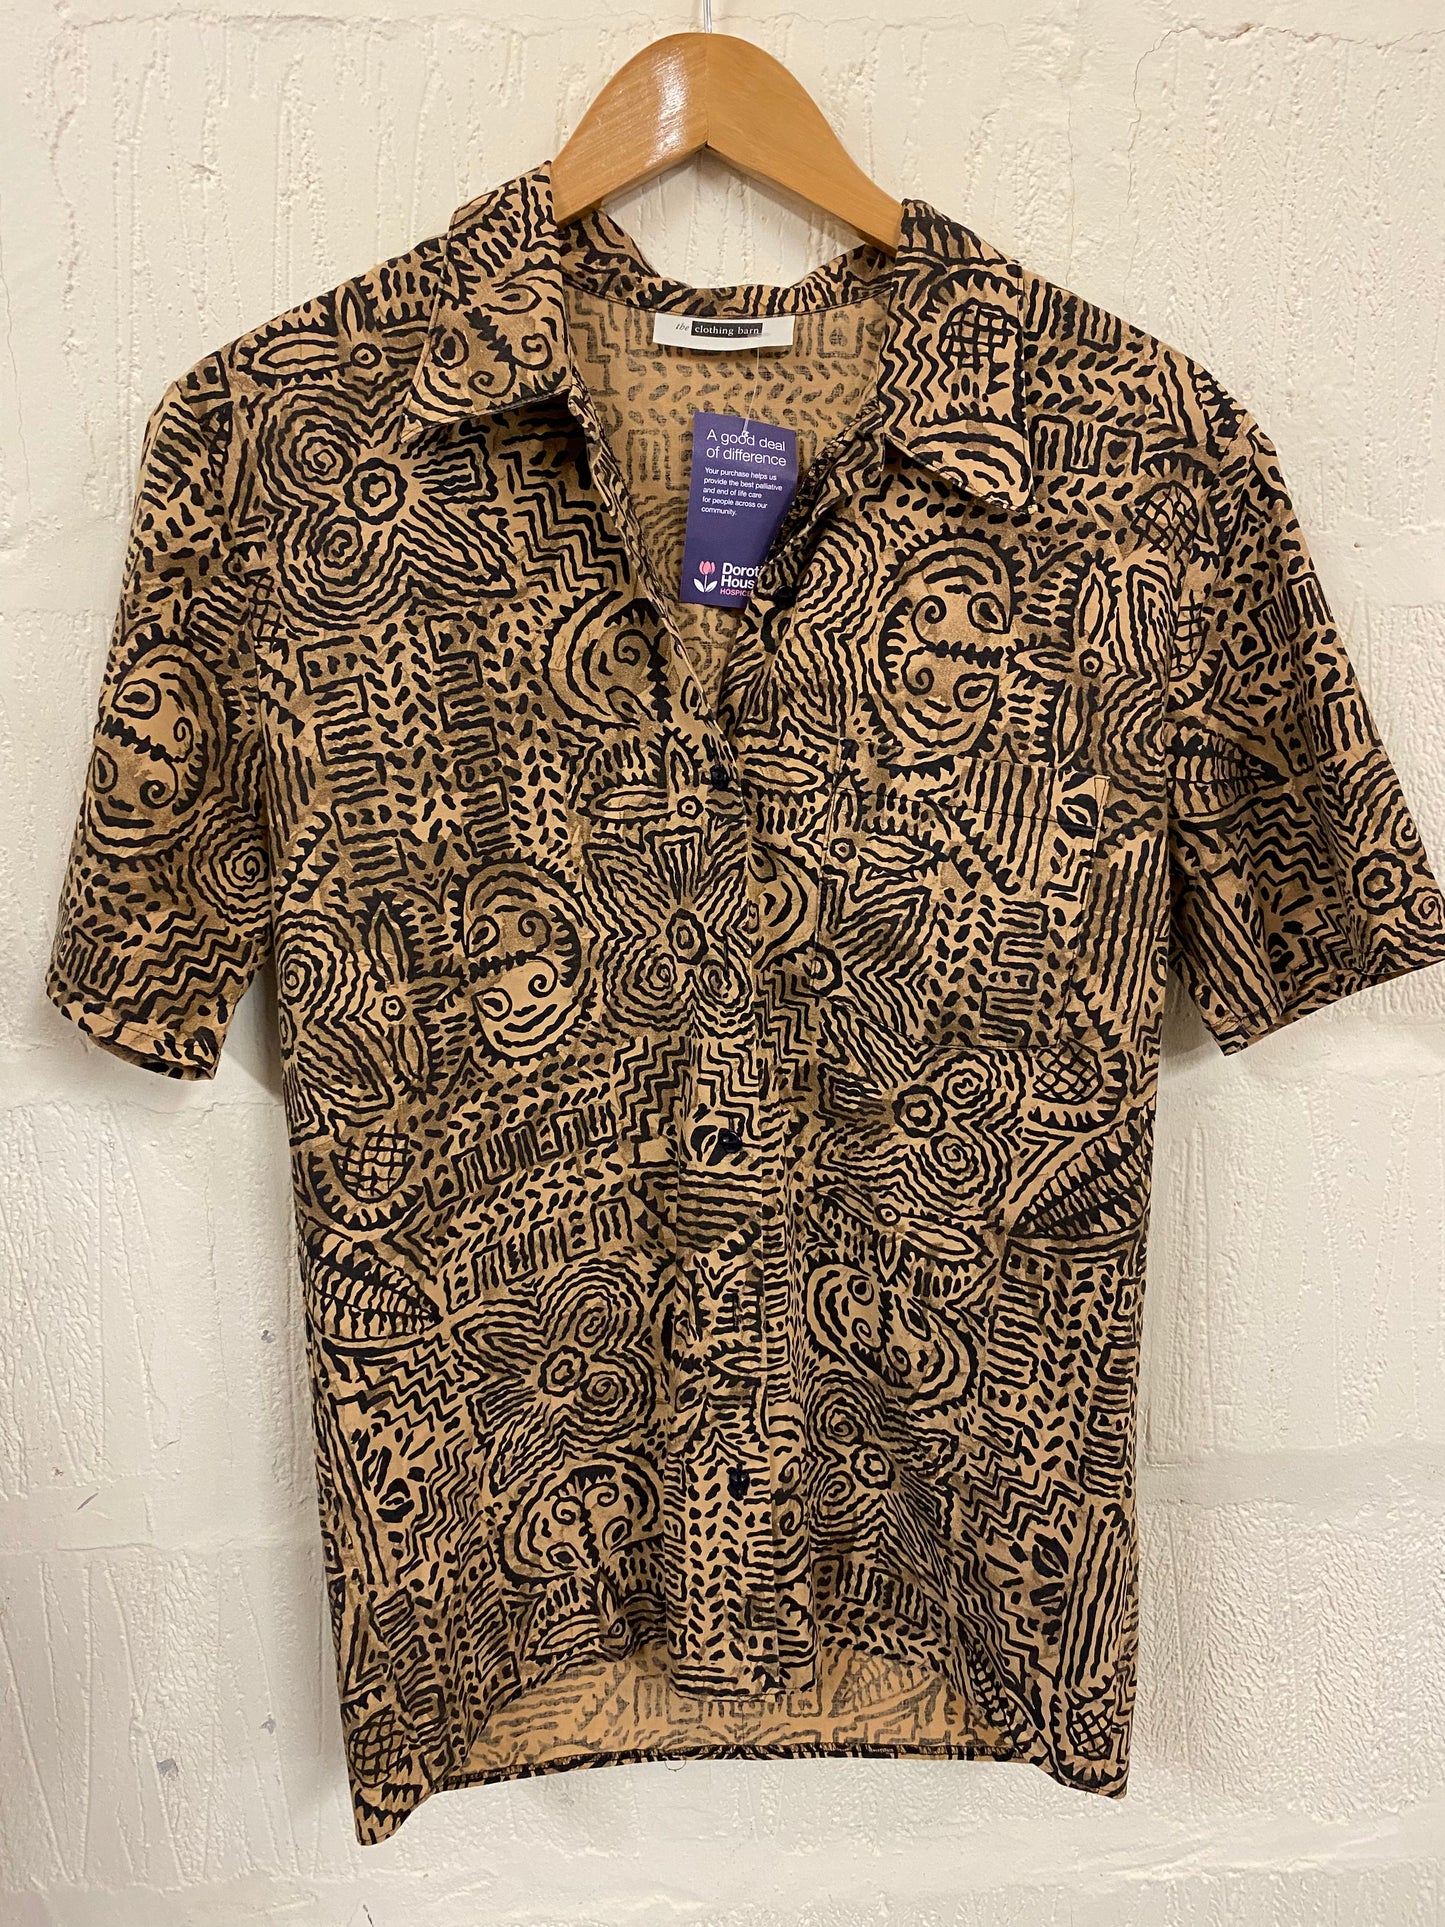 1950s Style Havana Vibes Tan and Black Patterned Cotton Shirt  Size 10